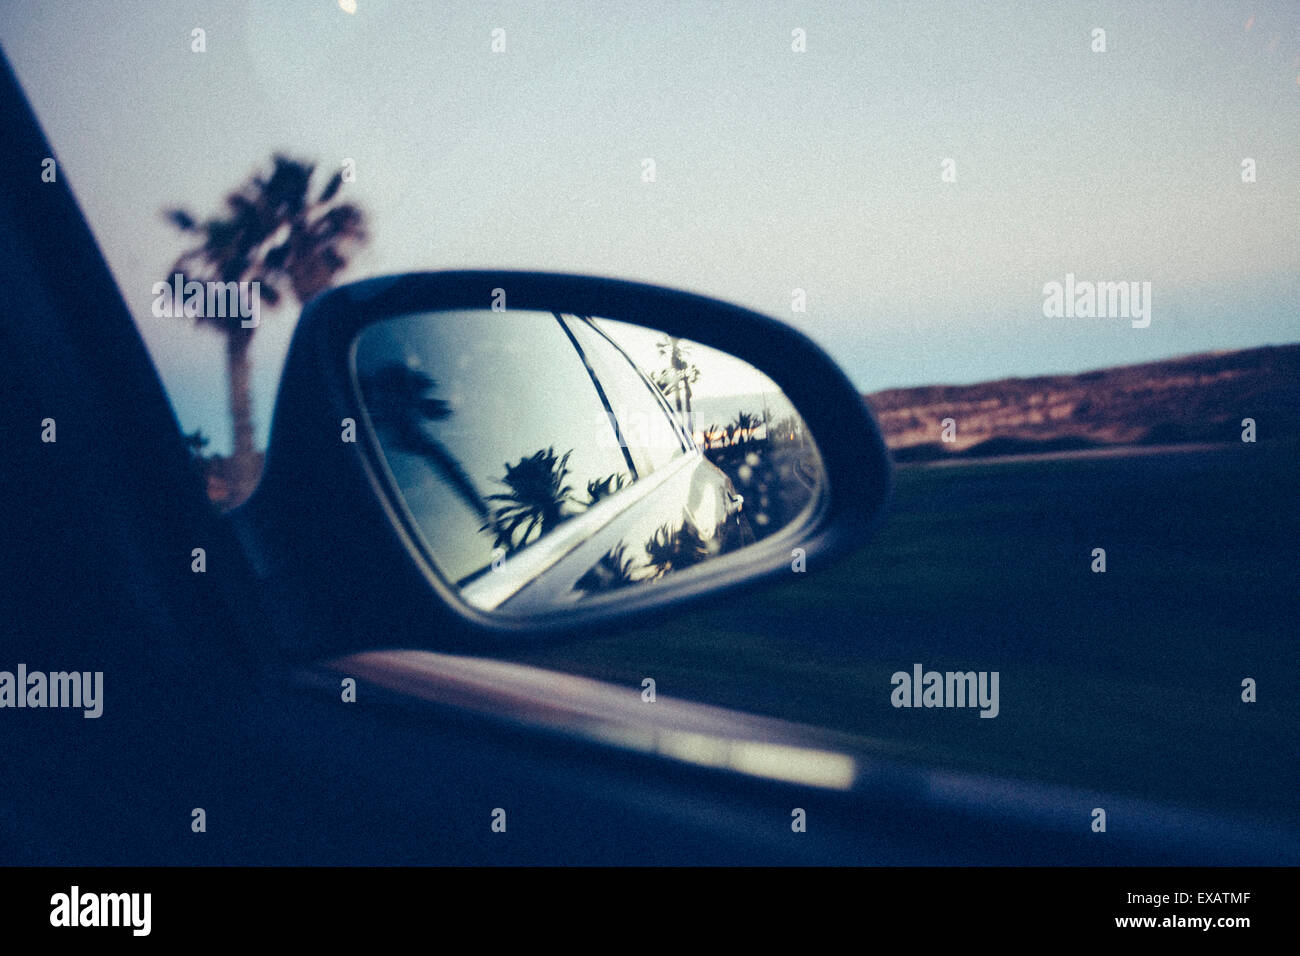 View in the rear-view mirror - Roadtrip Stock Photo